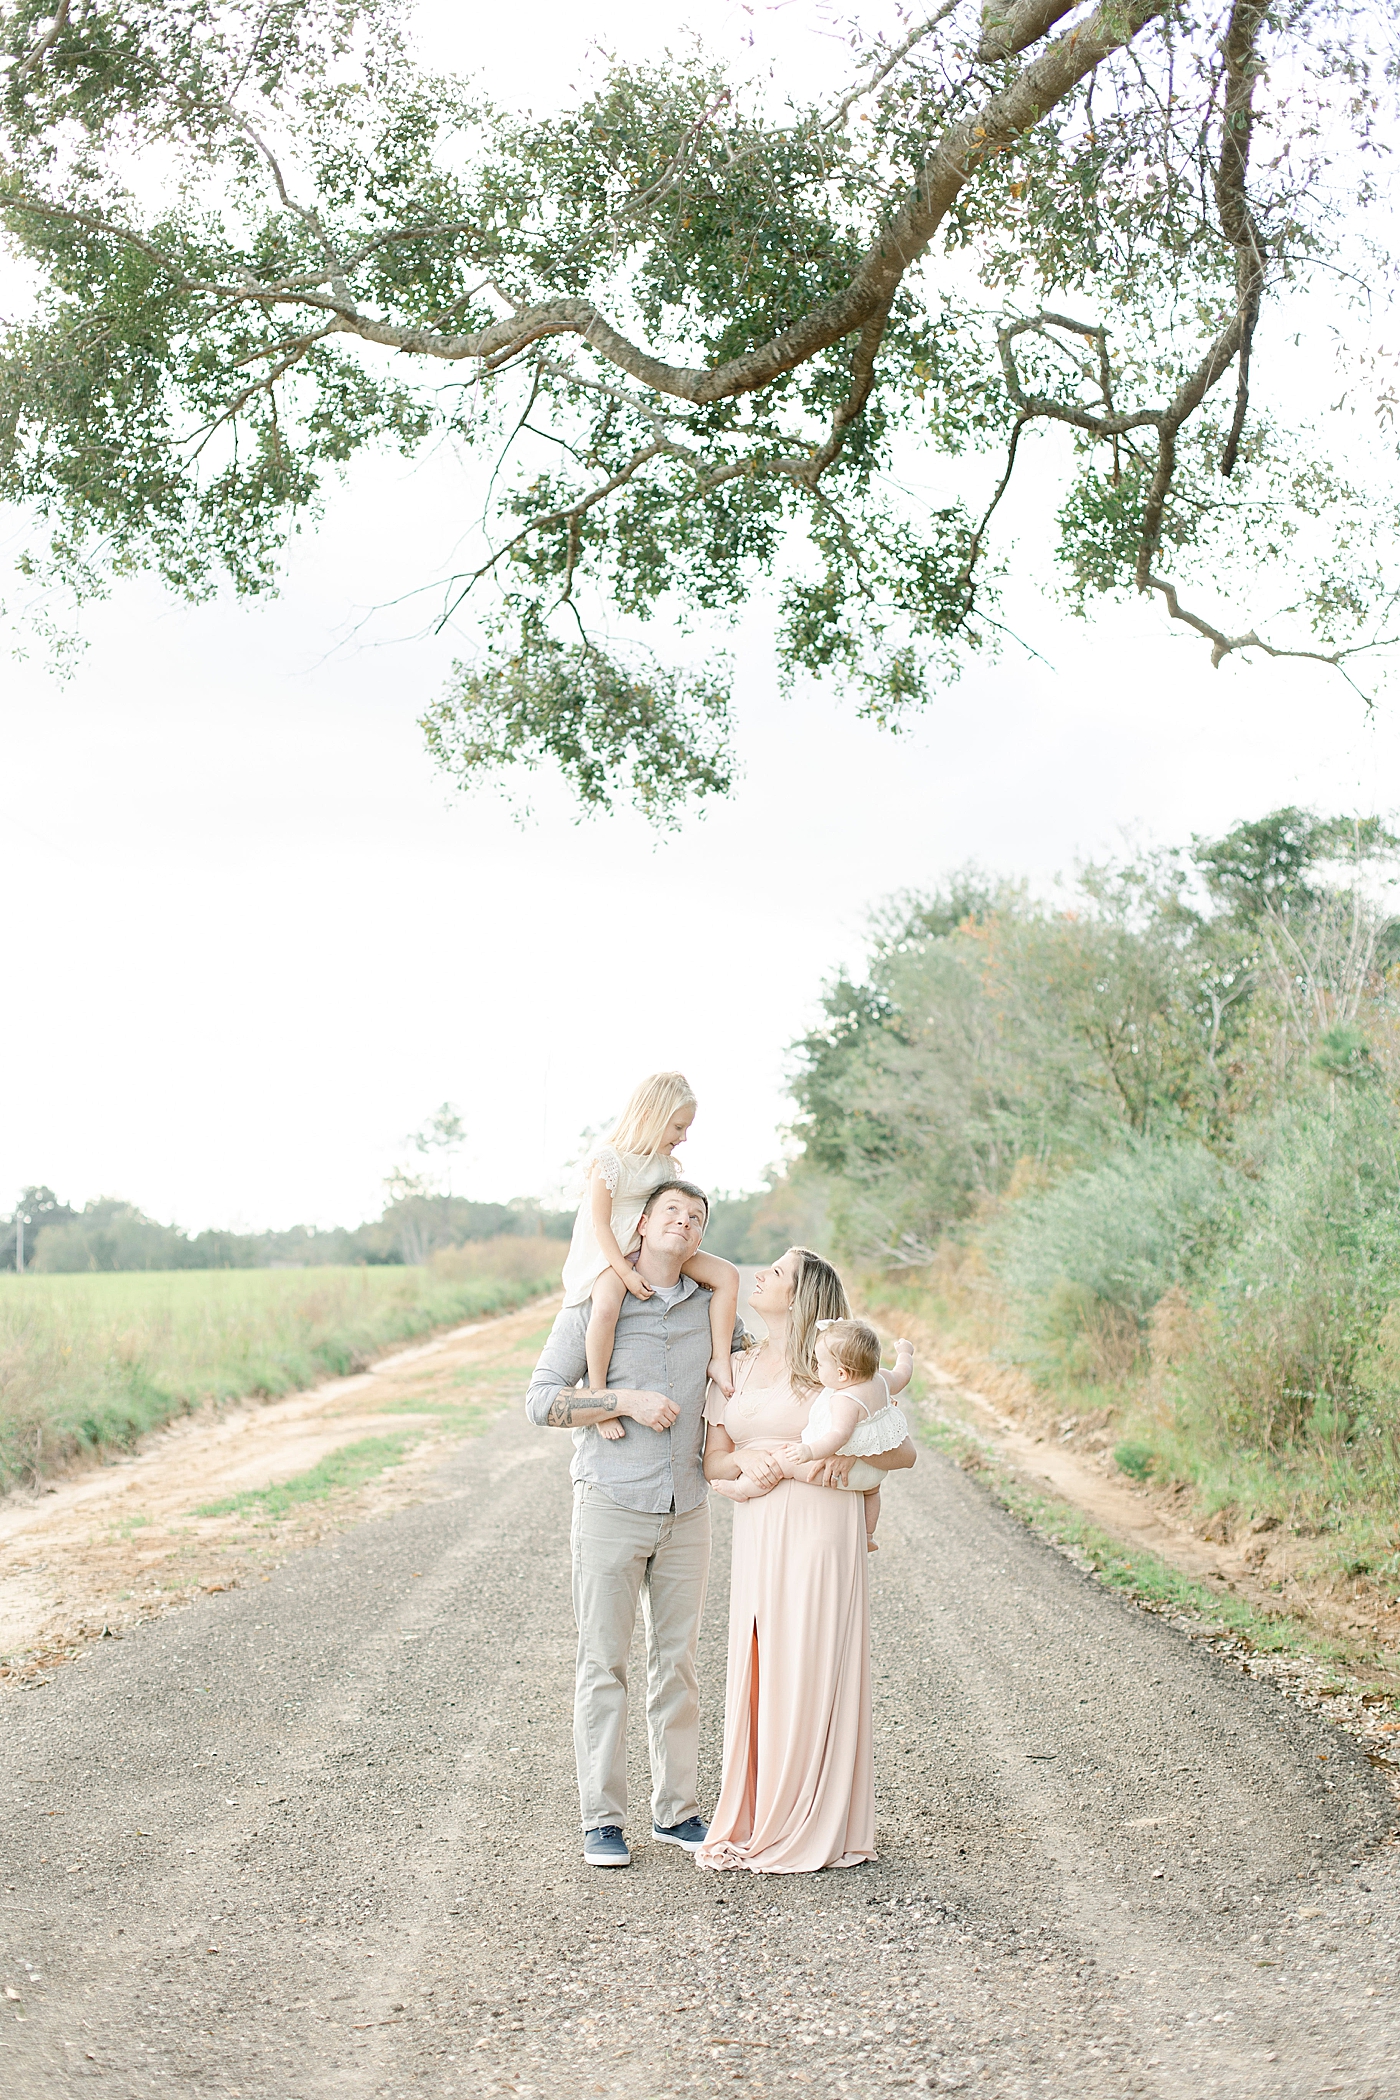 Family interacting while walking on a dirt path | Photo by Little Sunshine Photography 